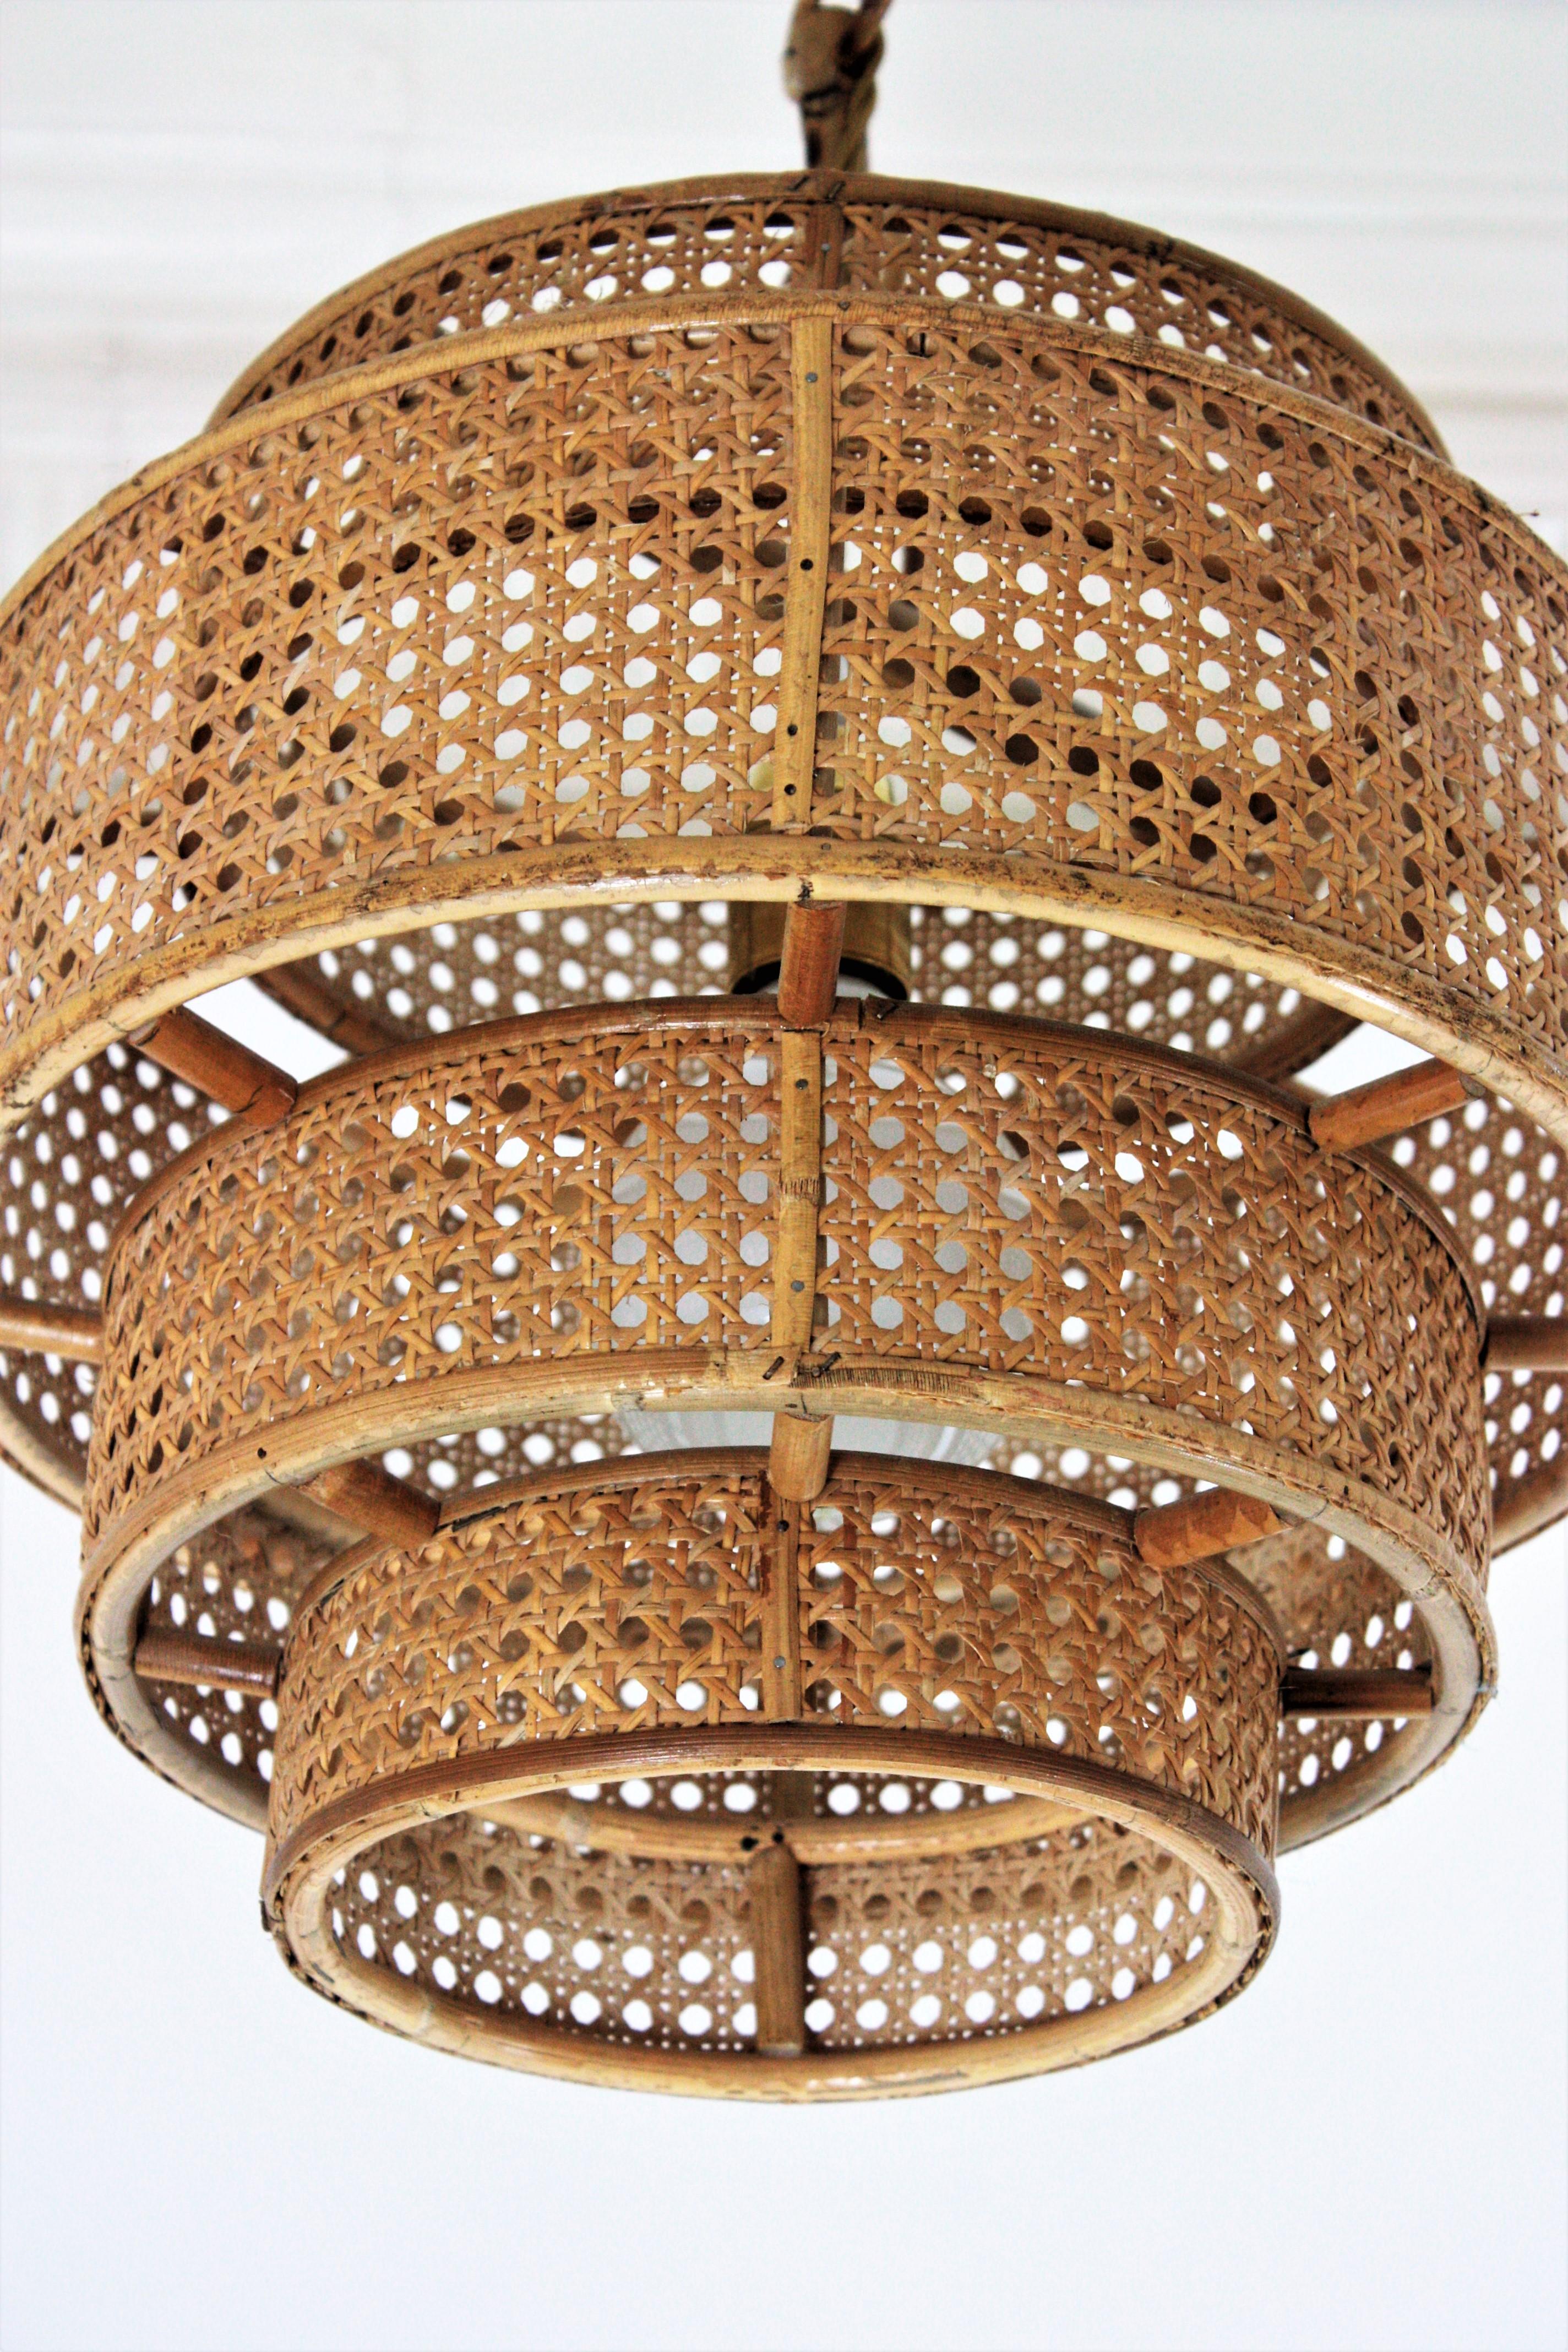  Rattan Wicker Weave Concentric Cylinder Pendant Hanging Light, 1960s For Sale 8